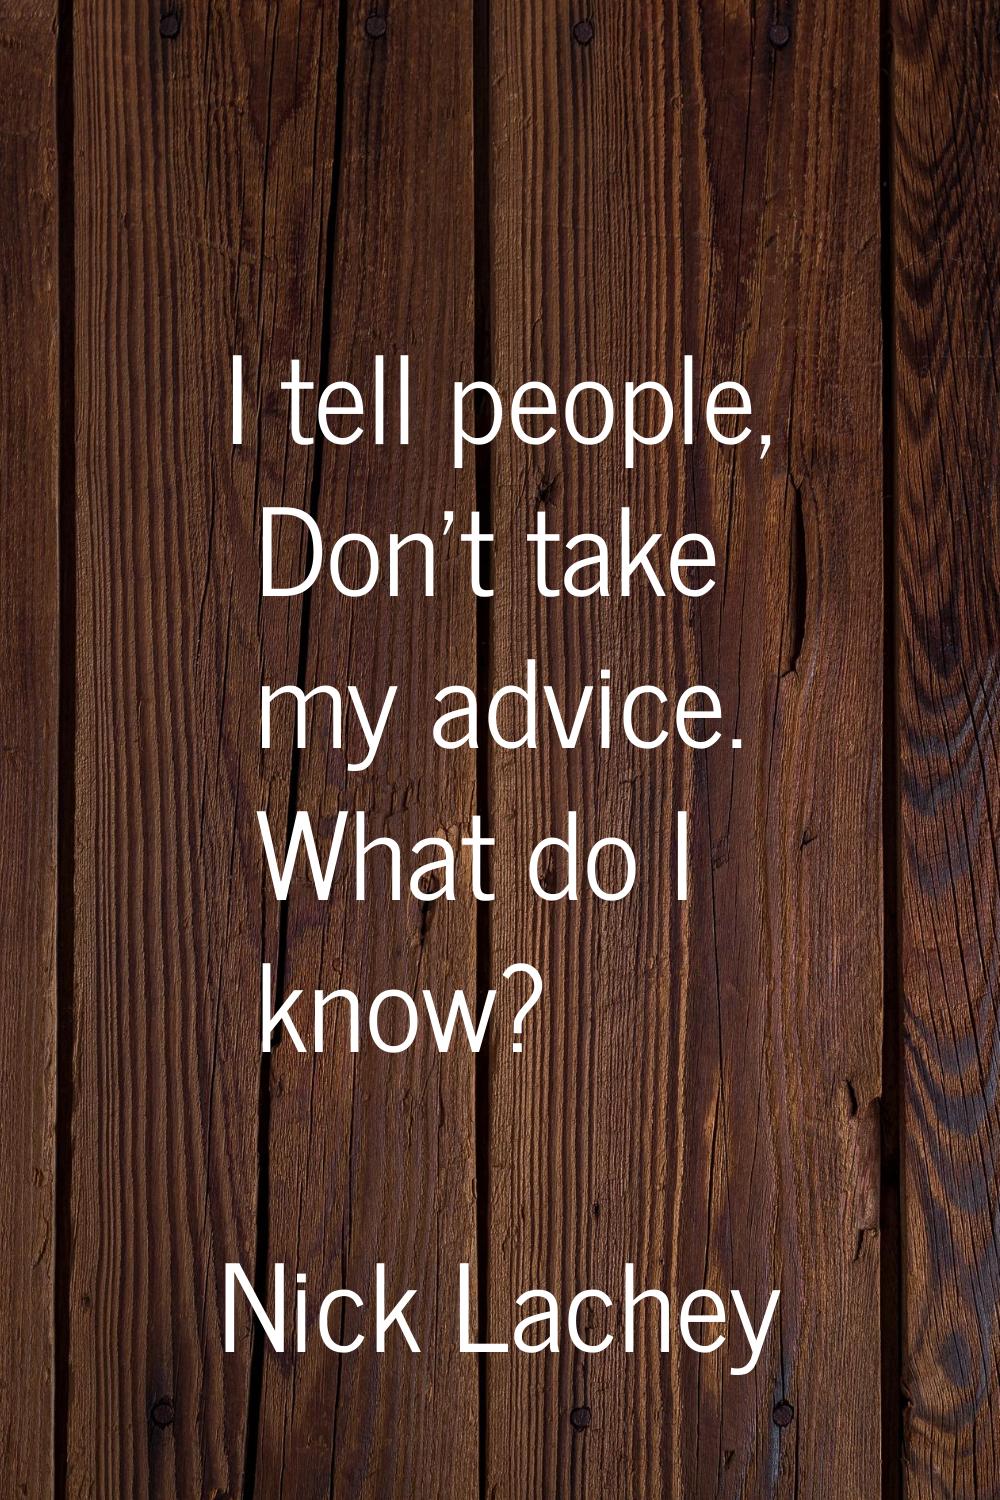 I tell people, Don't take my advice. What do I know?